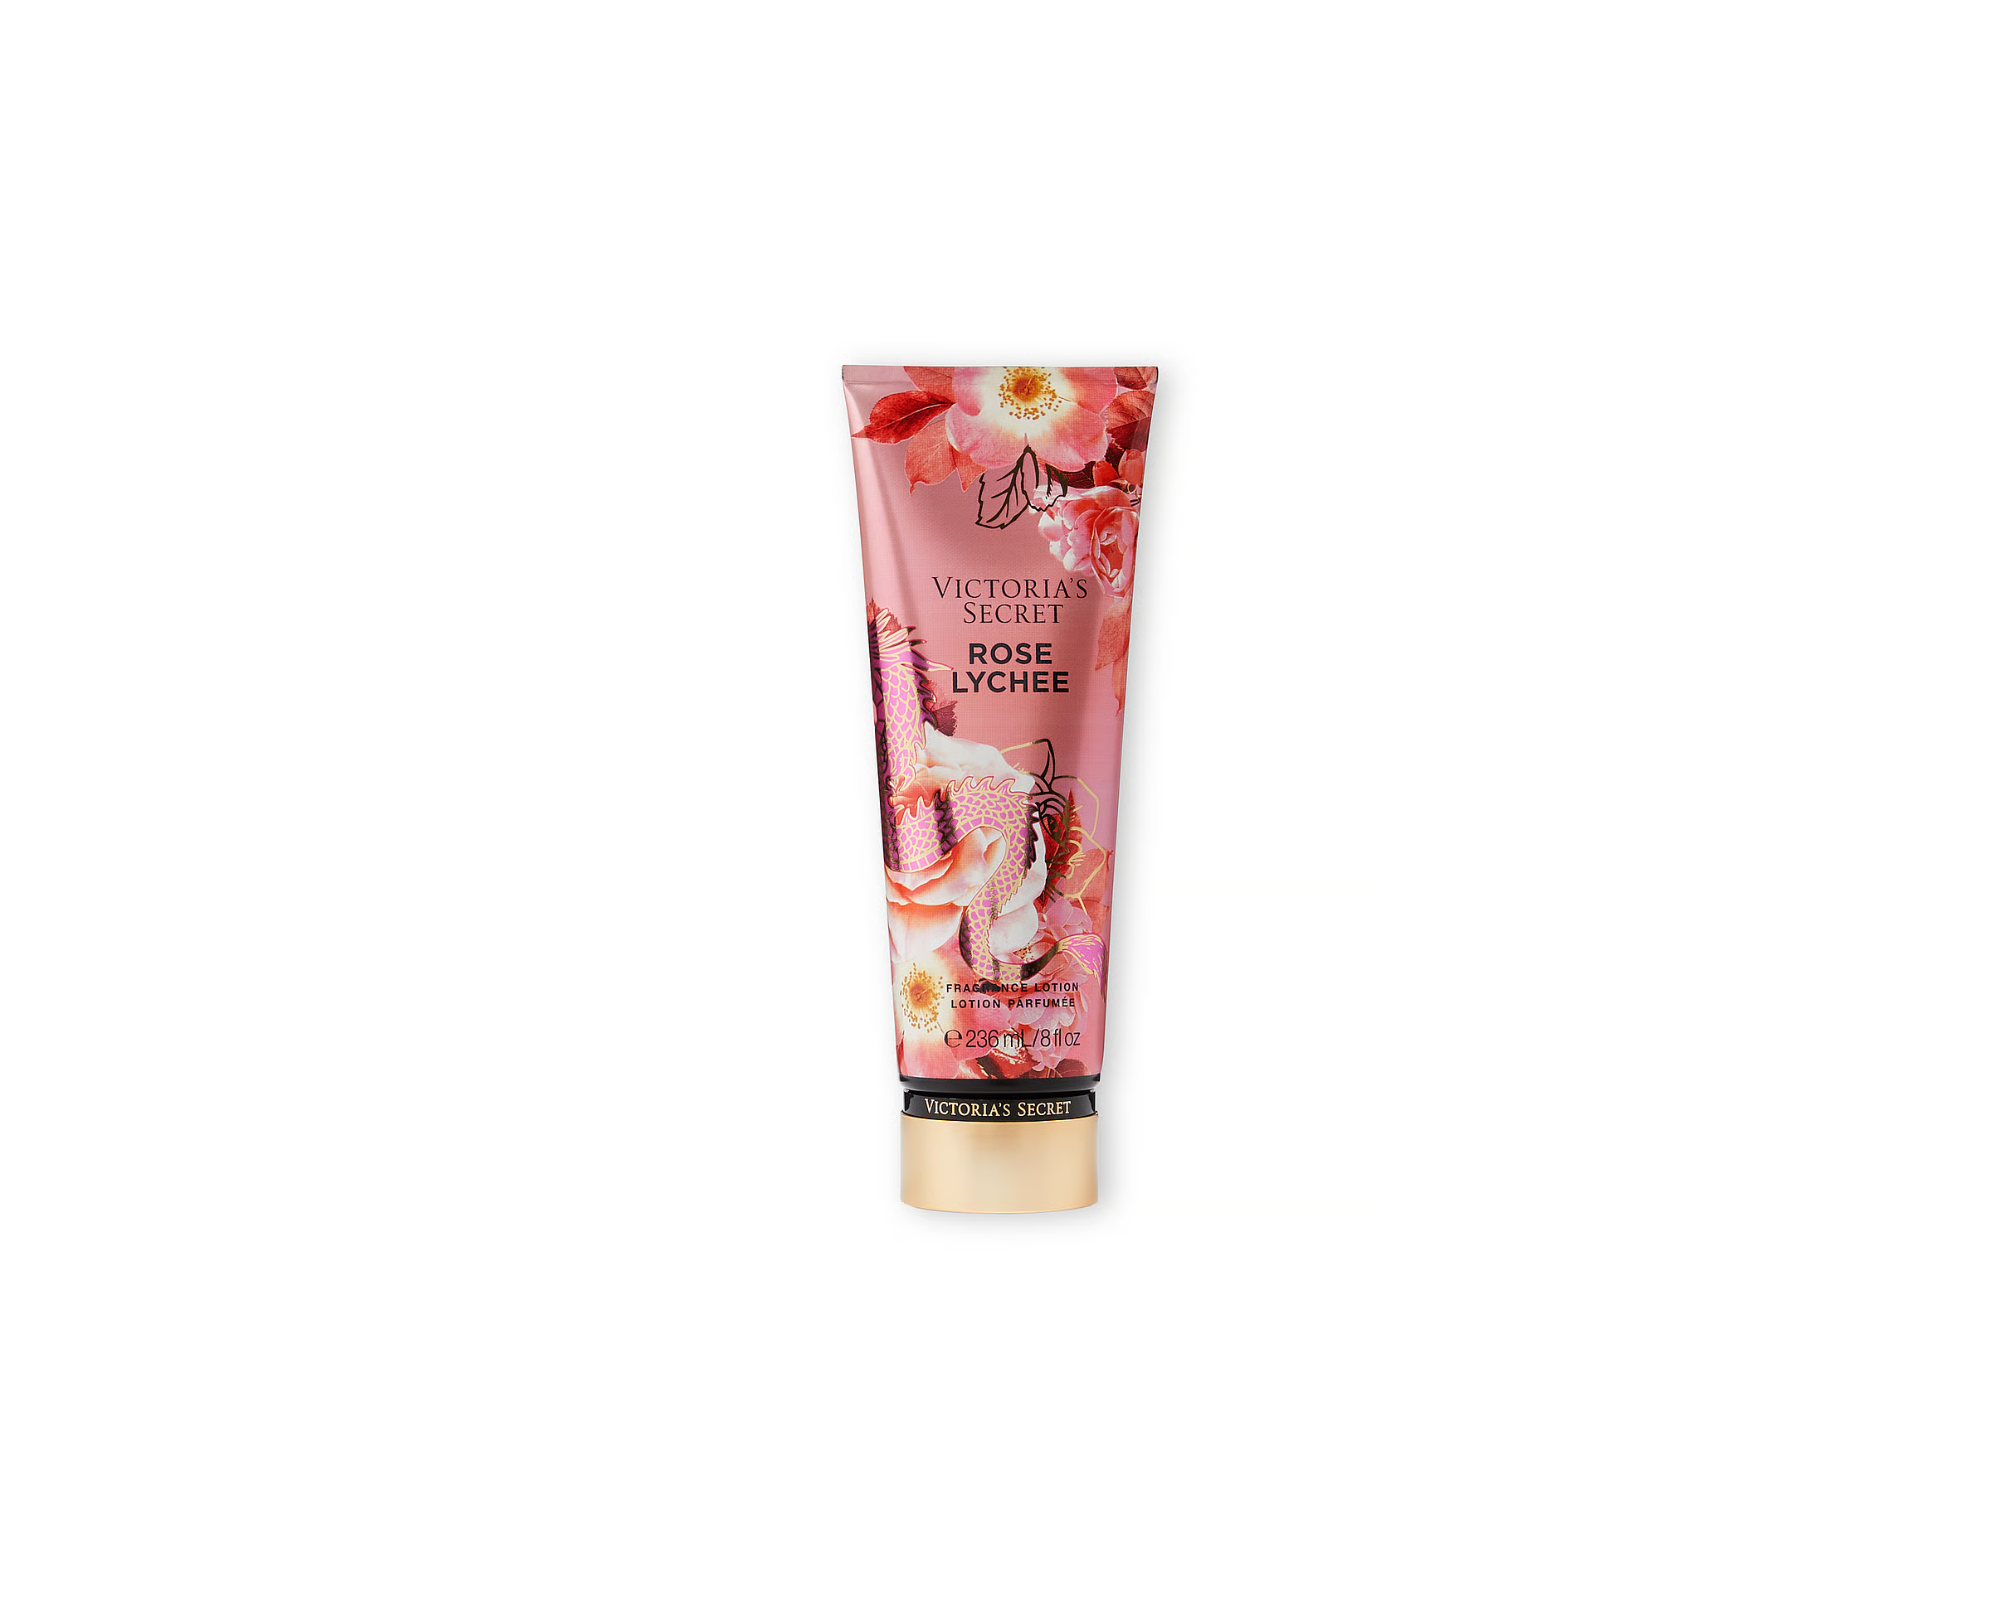 Victoria's Secret Year of Dragon Rose Lychee Body Lotion 236ml